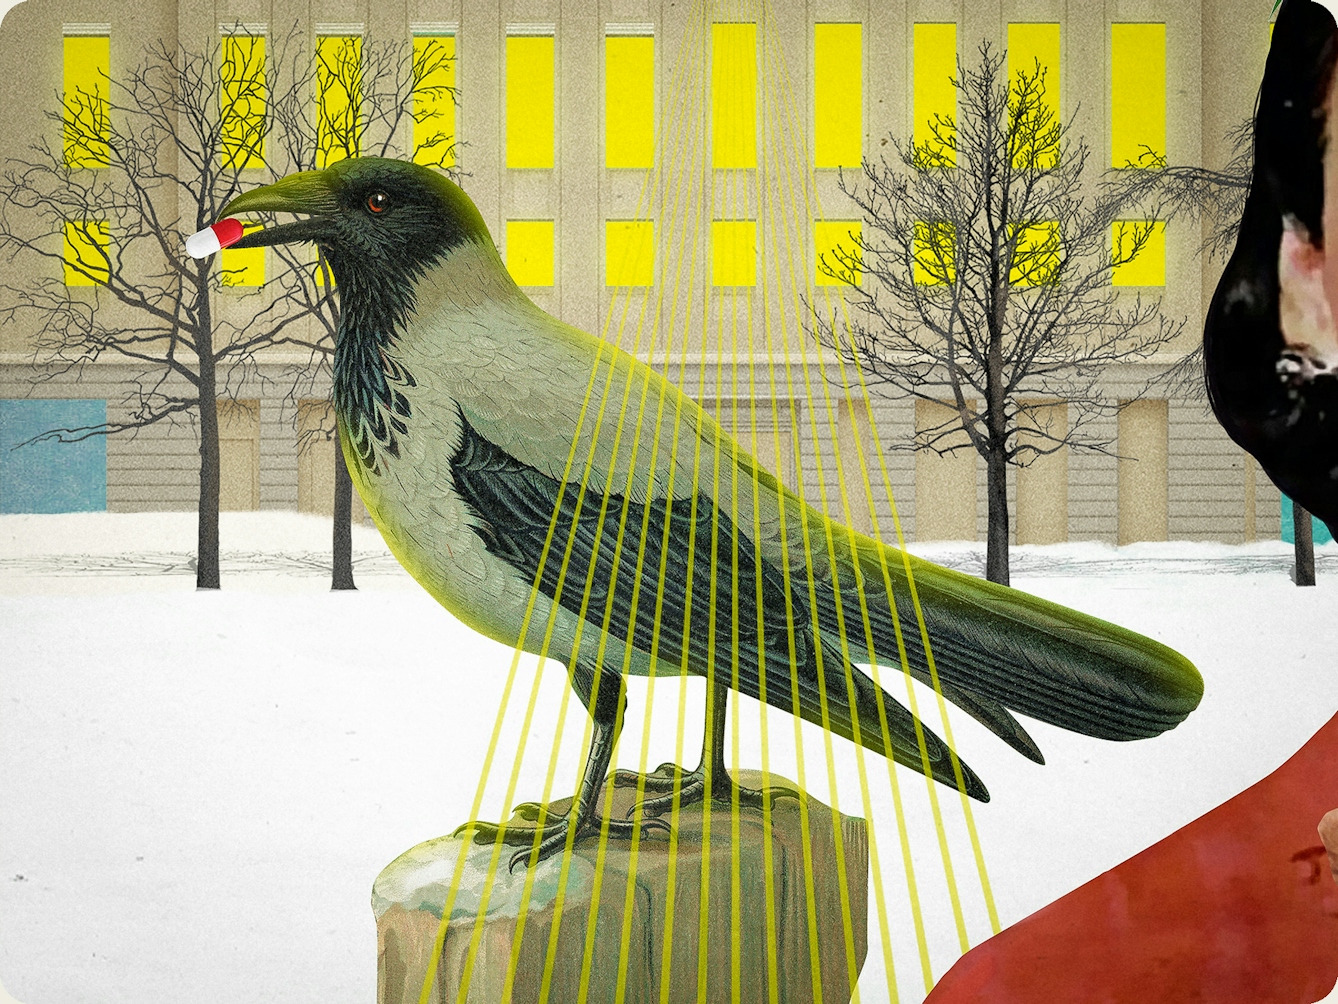 Detail from a larger mixed media digital artwork combining found imagery from vintage magazines and books with painted and textured elements. The overall hues are greens, yellows and pinks. At the centre of the artwork is a crow in profile, stood on a rock with a white and red pill capsule in its mouth. Behind the crow is a snowy scene surrounding a large industrial building. The lights inside the building are bright yellow with fans of laser lights shining out of the windows towards the viewer over the back of the crow. 